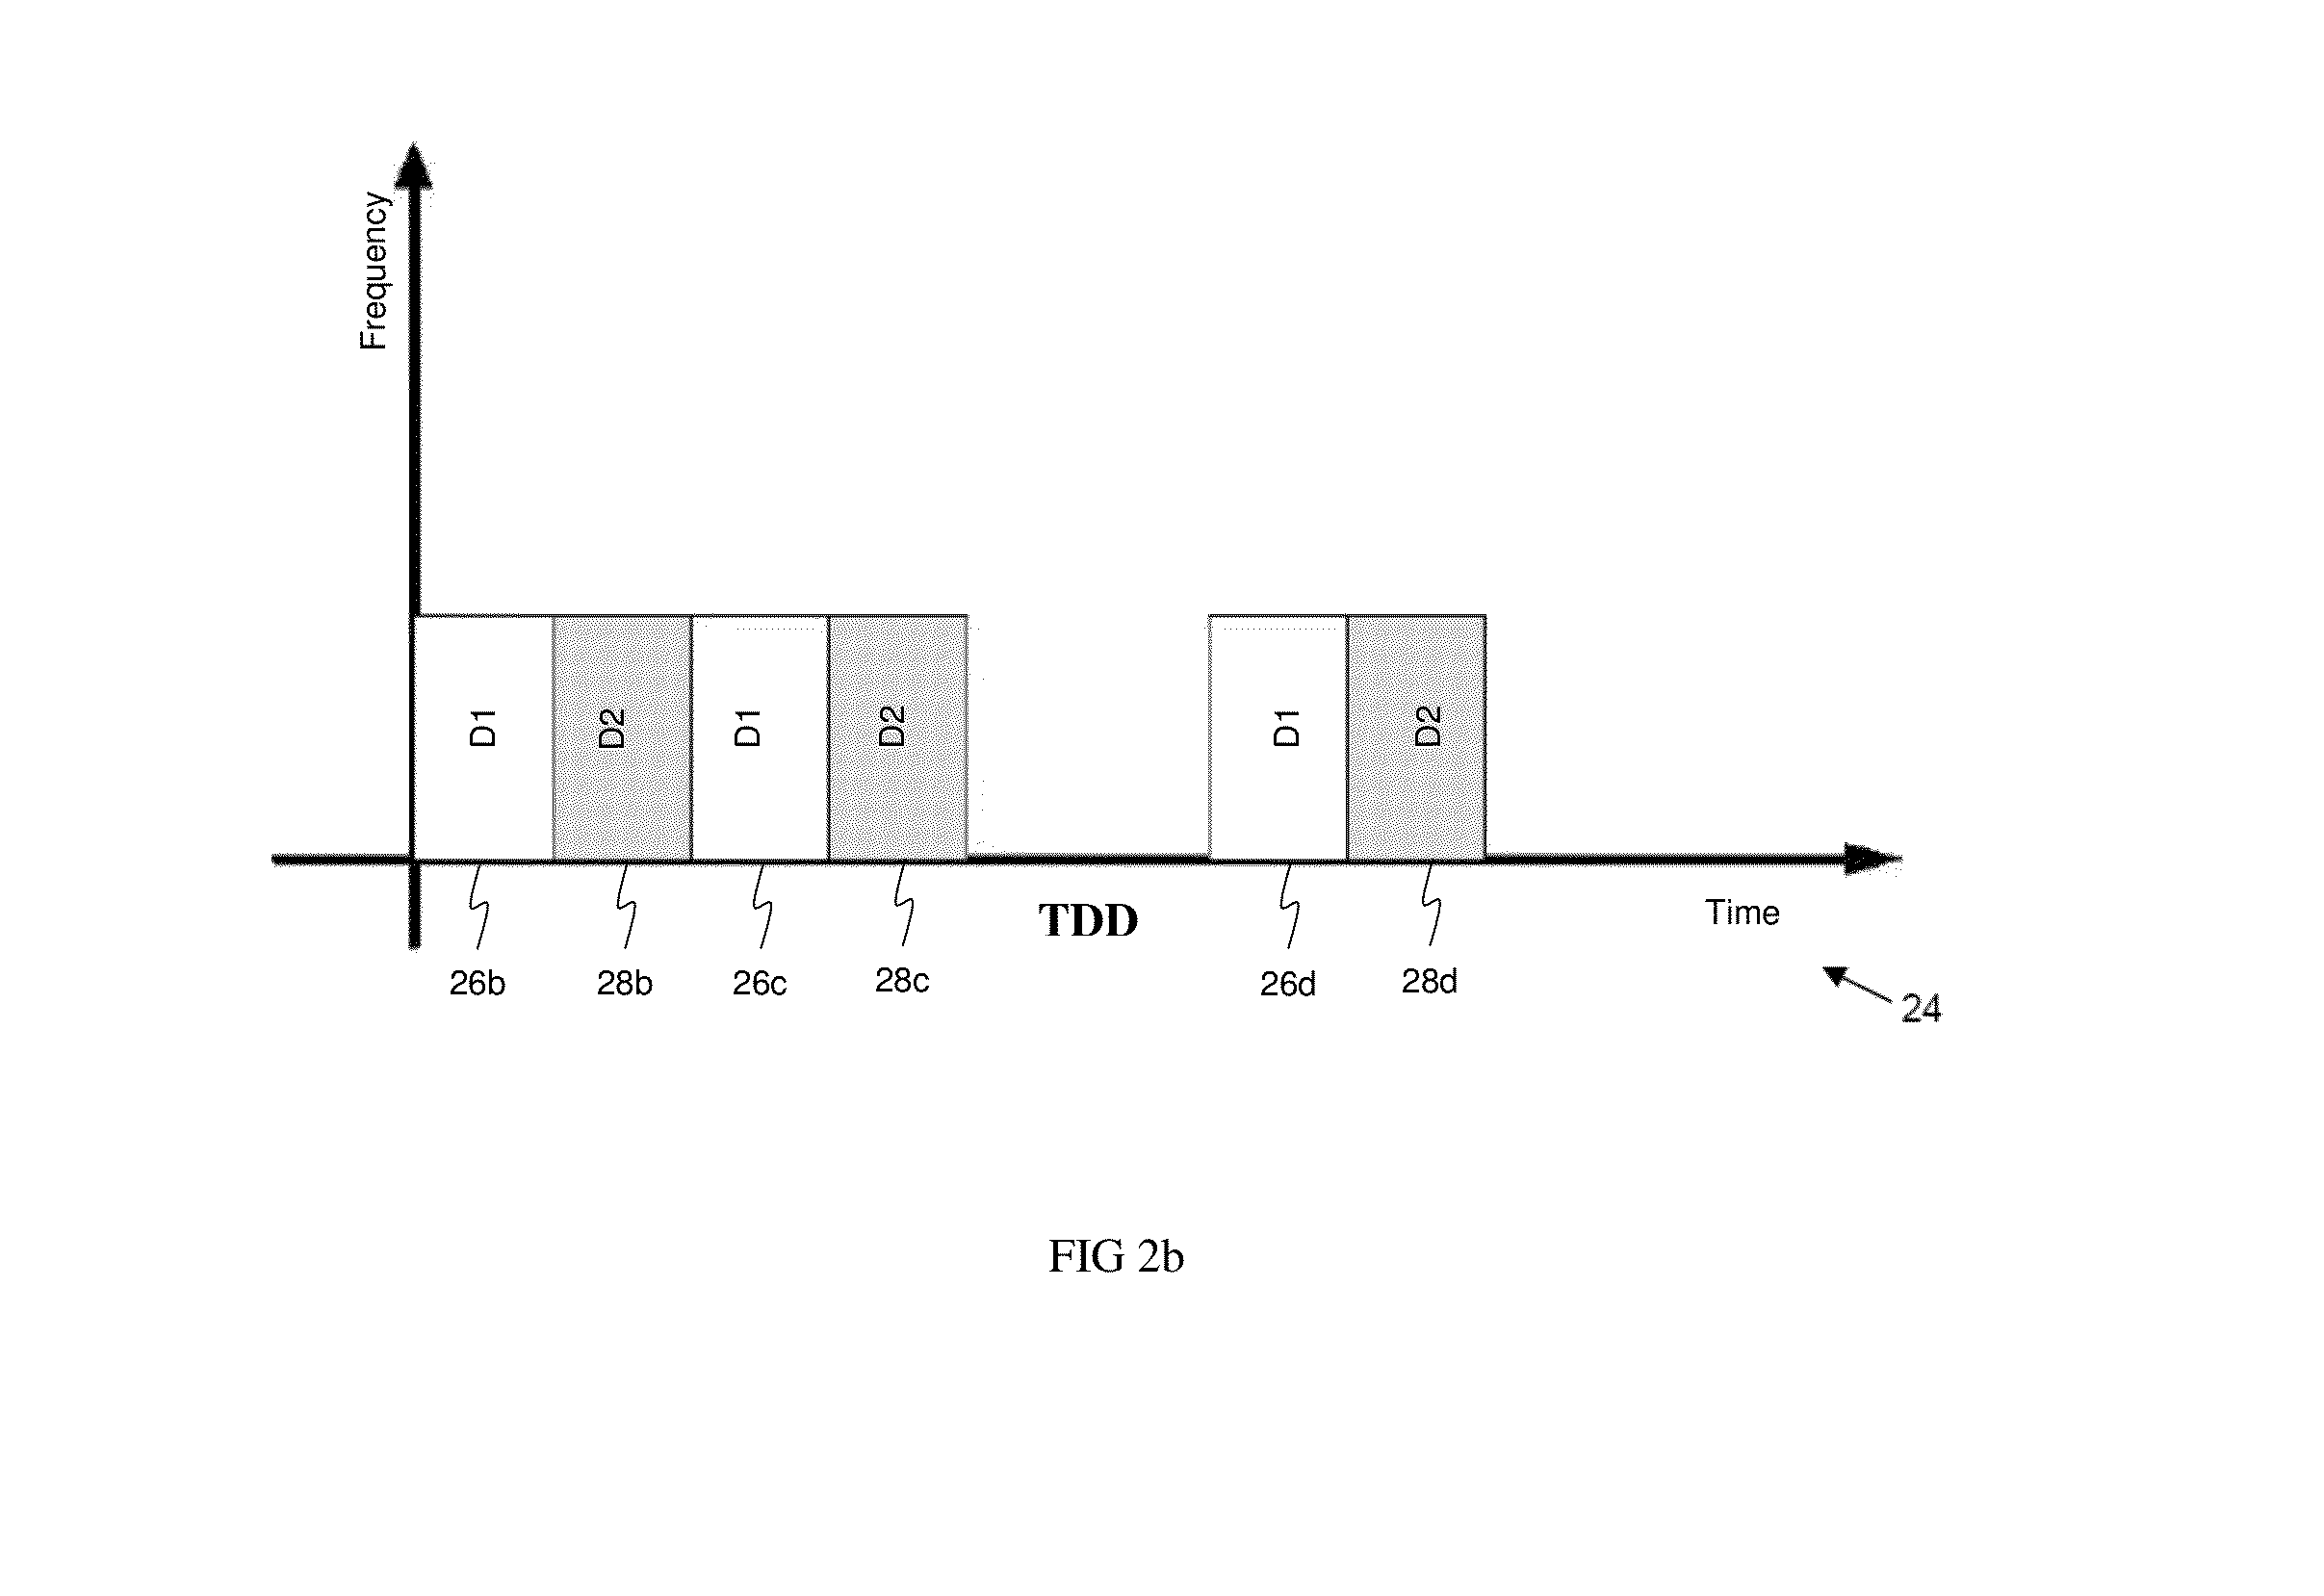 Method and apparatus for wireless security enhancement using multiple attributes monitoring, continuous and interleaved authentication, and system adaptation